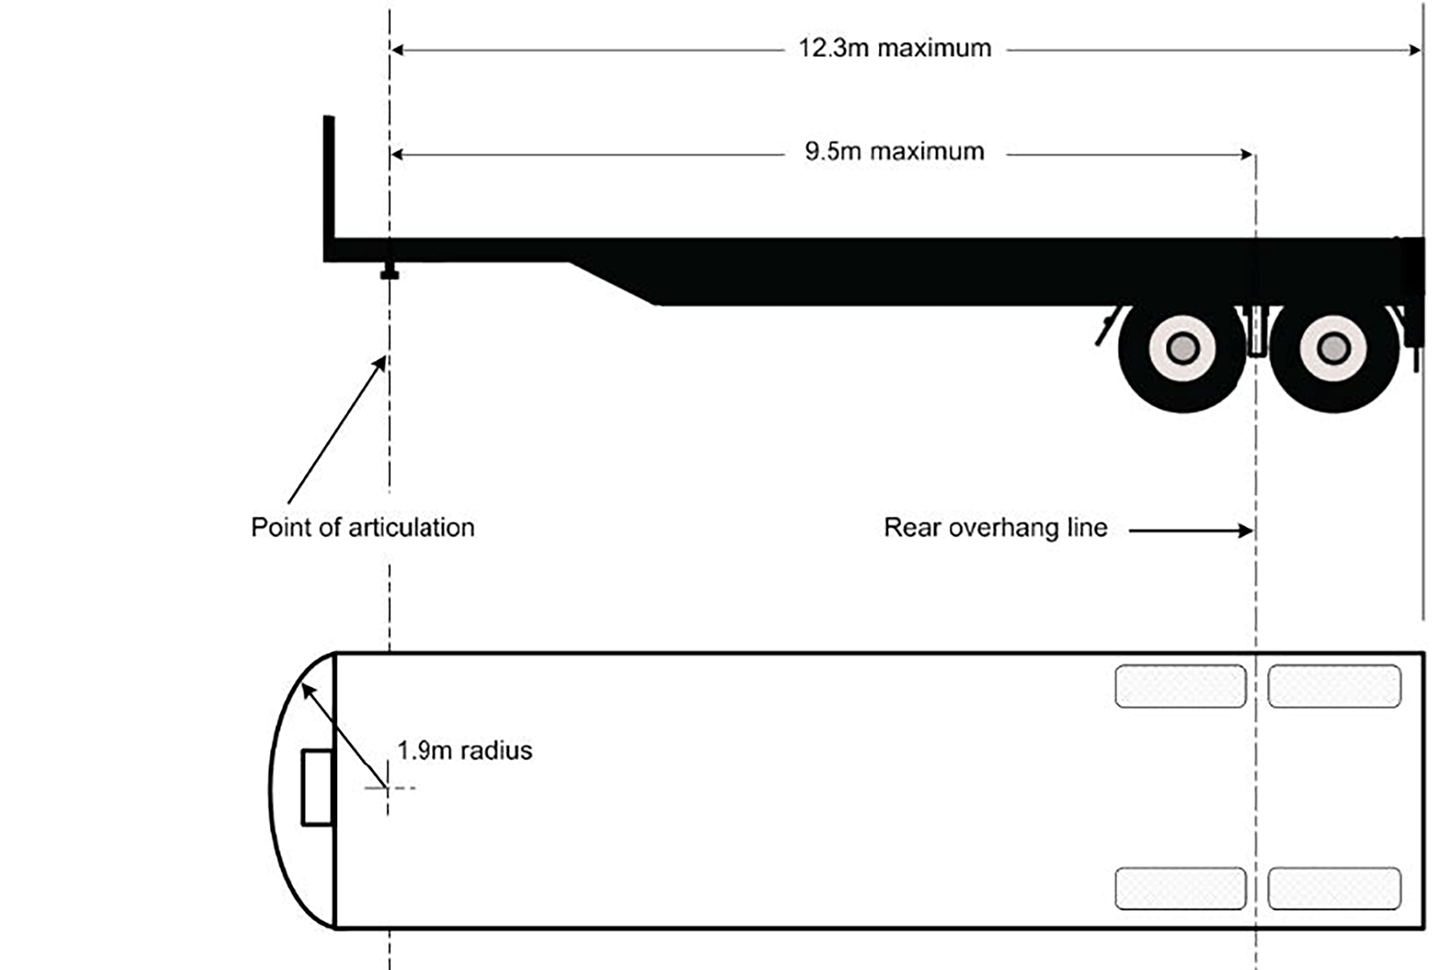 Example of the maximum dimensions of a semitrailer